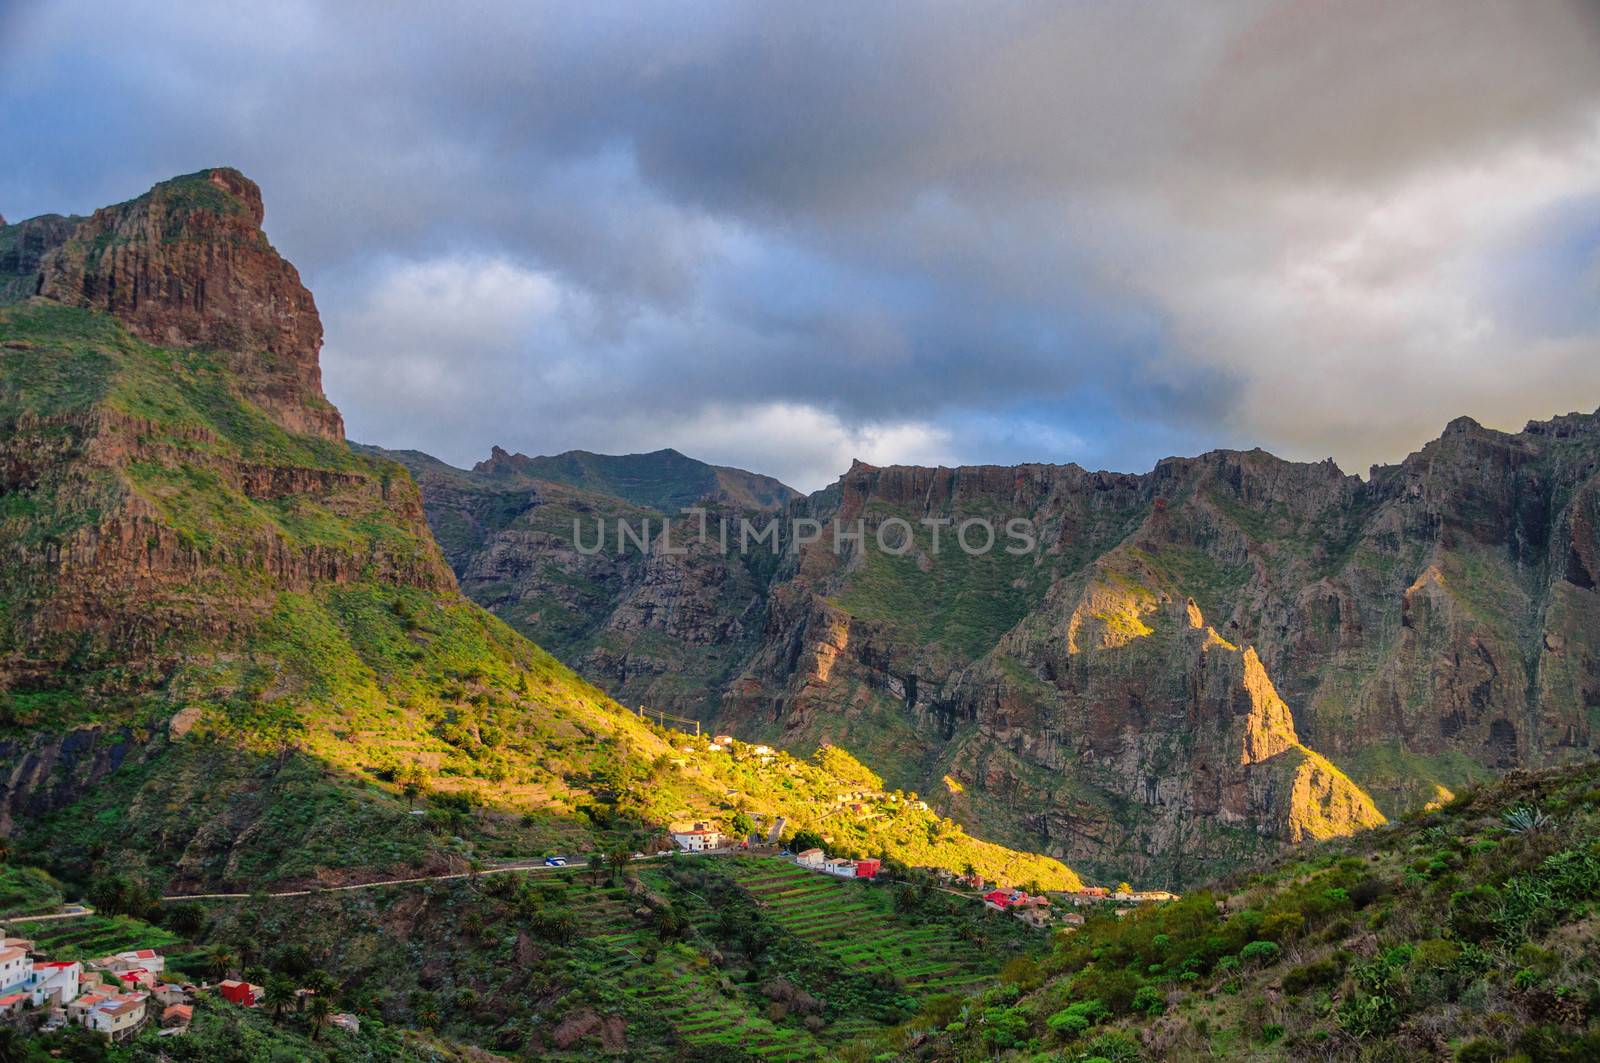 Sunset in North-West mountains of Tenerife near Masca village, C by Eagle2308